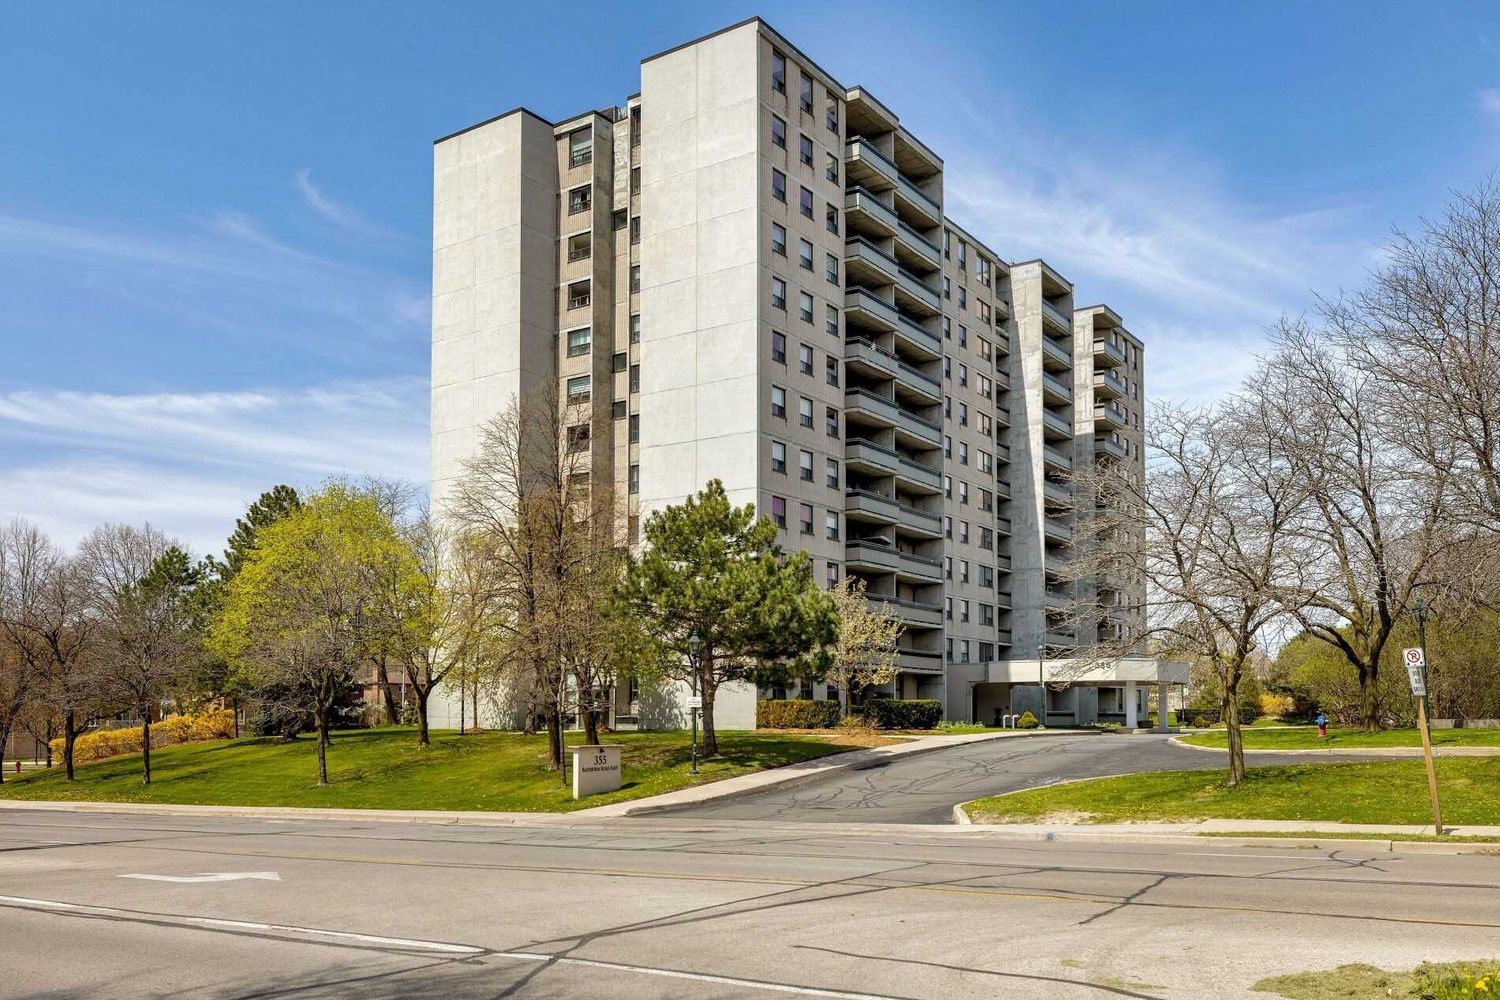 355 Rathburn Road E. Rathburn Towers Condos is located in  Mississauga, Toronto - image #3 of 3